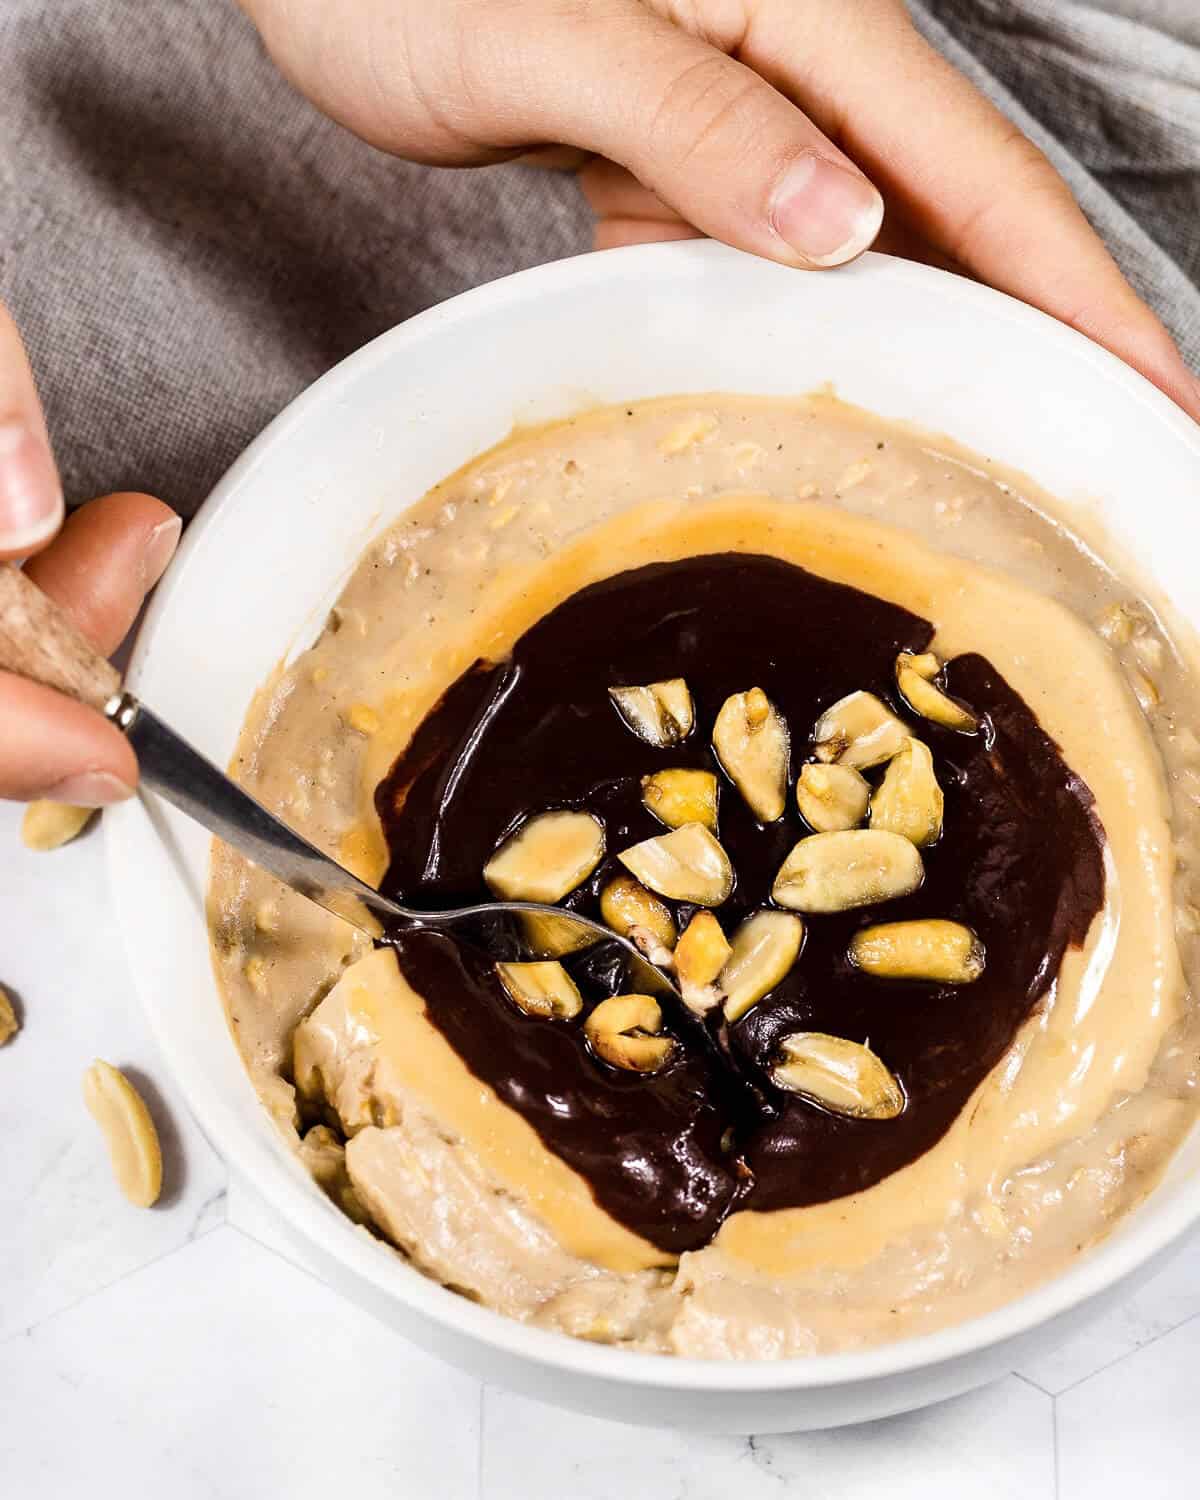 Someone is holding a bowl of snickers oats and taking a bite with a spoon.